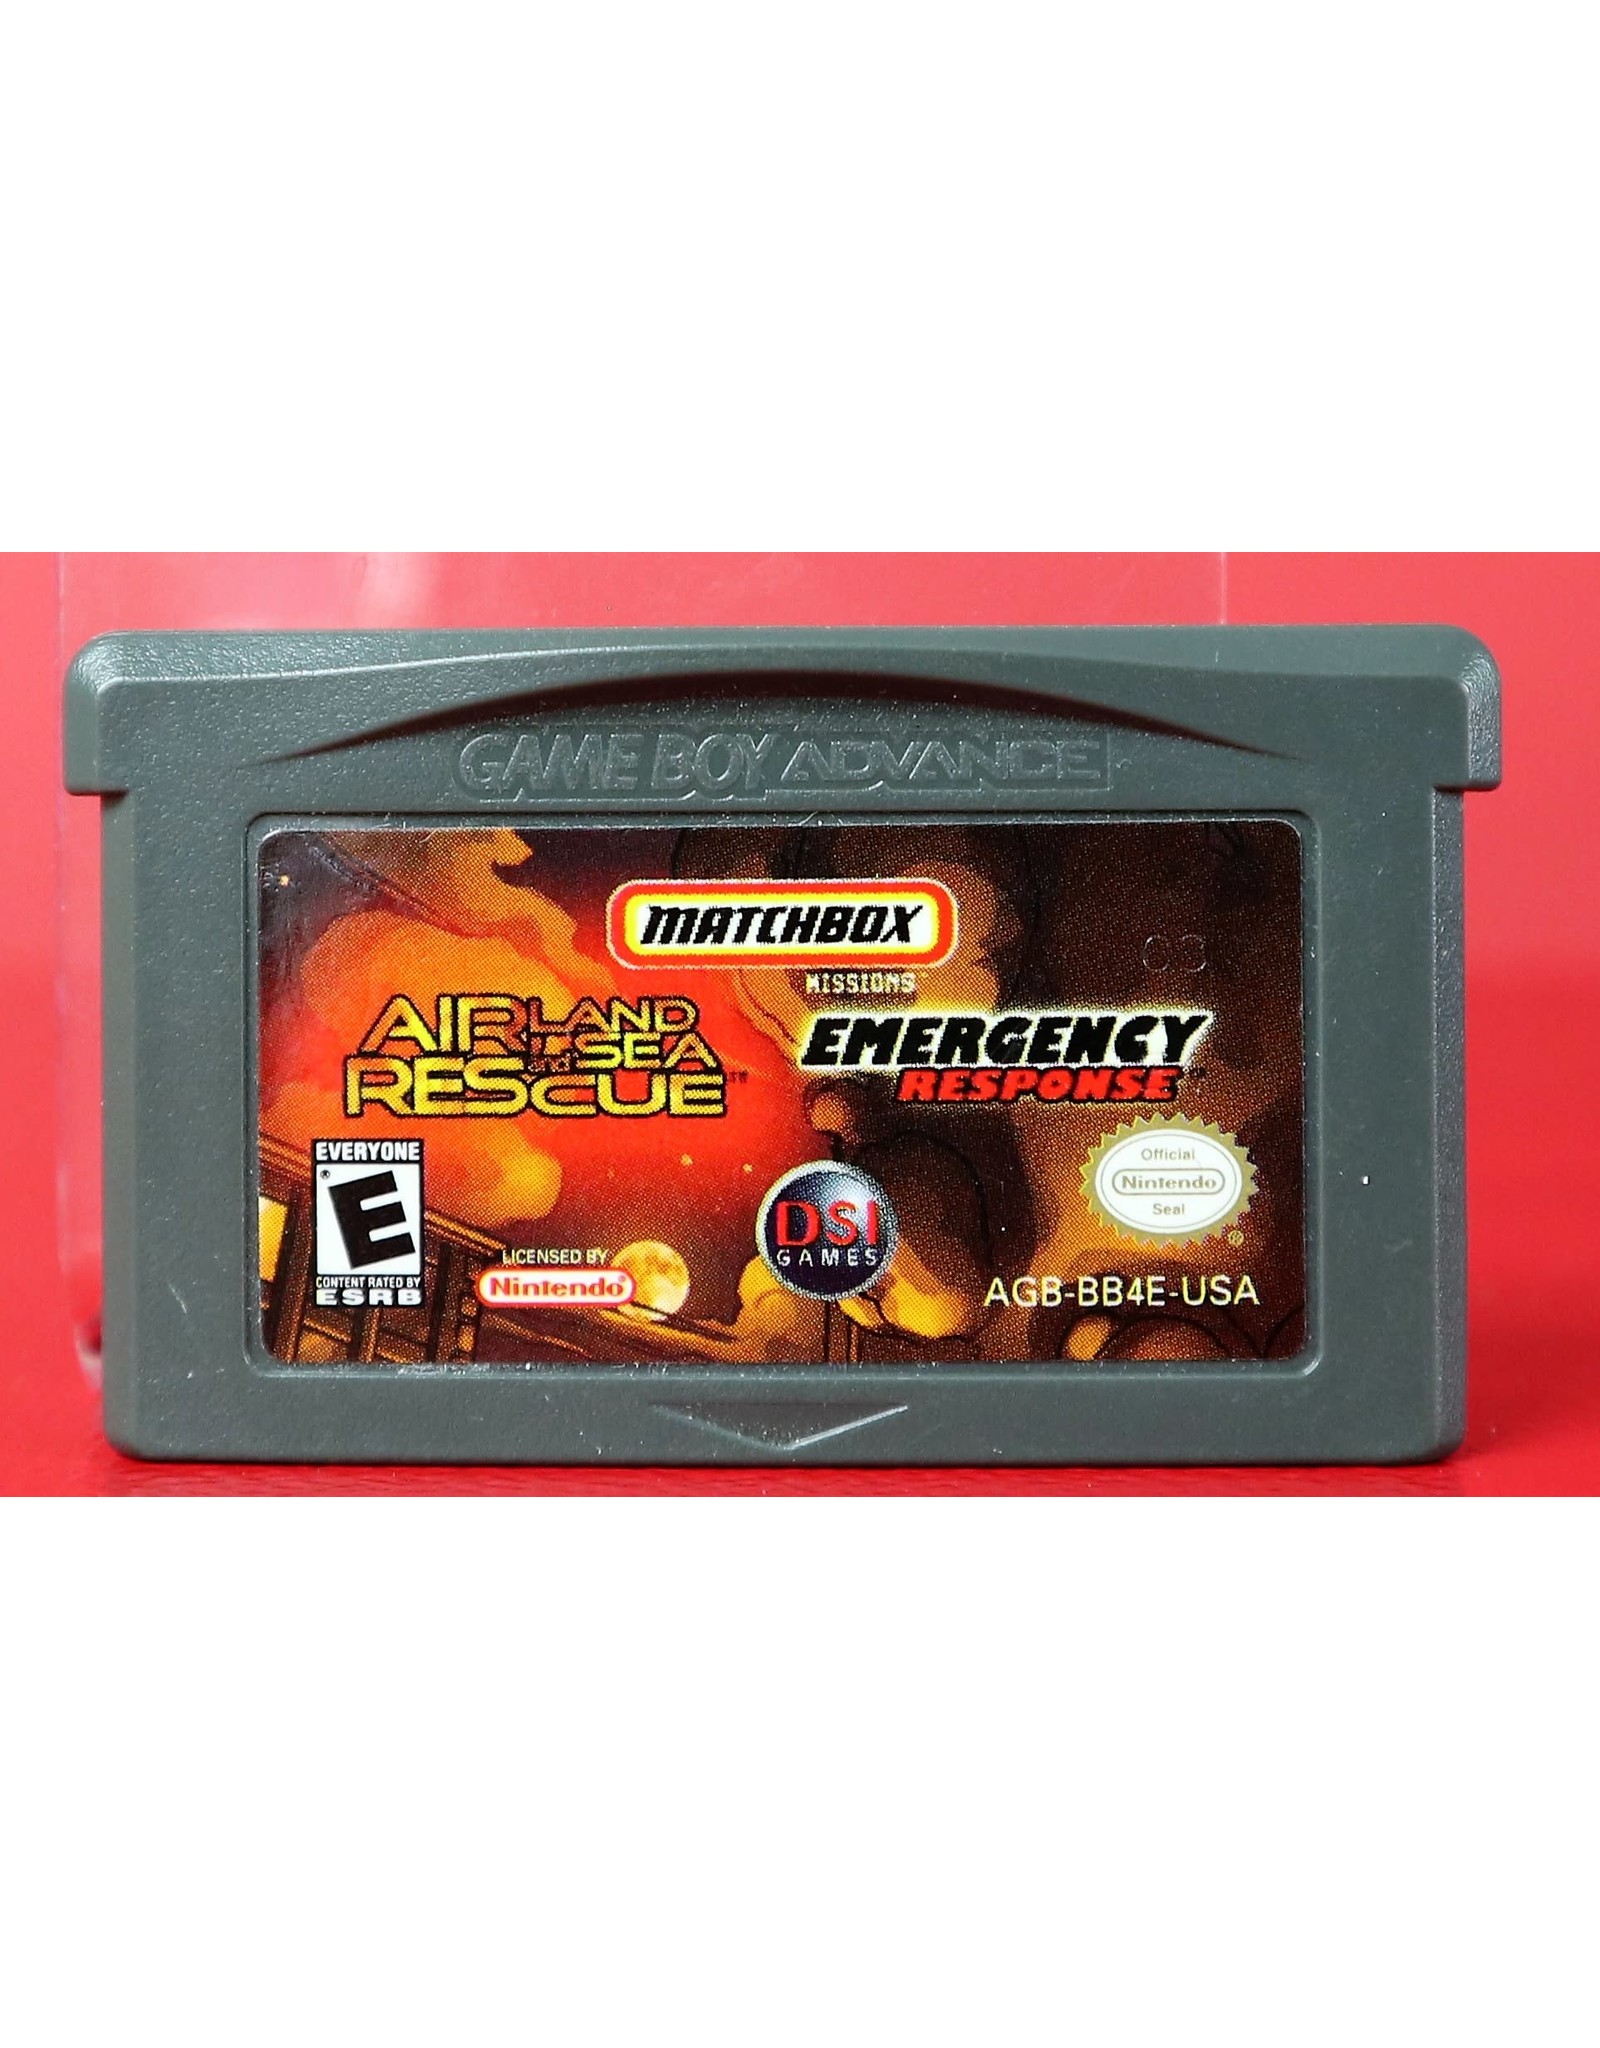 Used Game - Game Boy Advance - Matchbox Air Land Sea Rescue & Emergency Response [Cart Only]